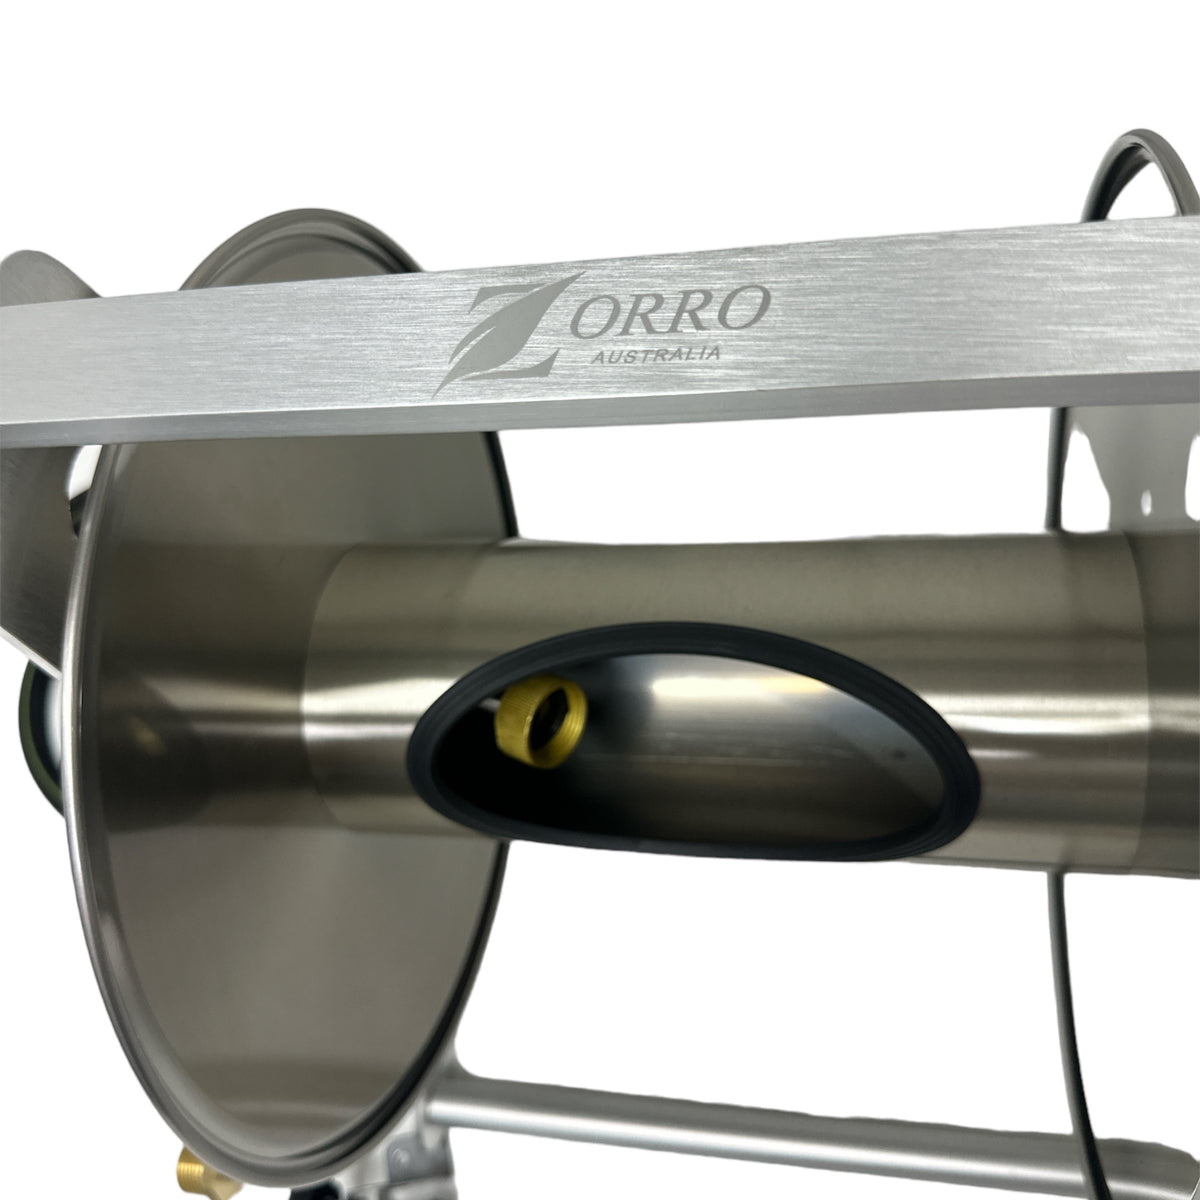 ZORRO Compact Stainless Steel Mountable Reel with Extension Hose